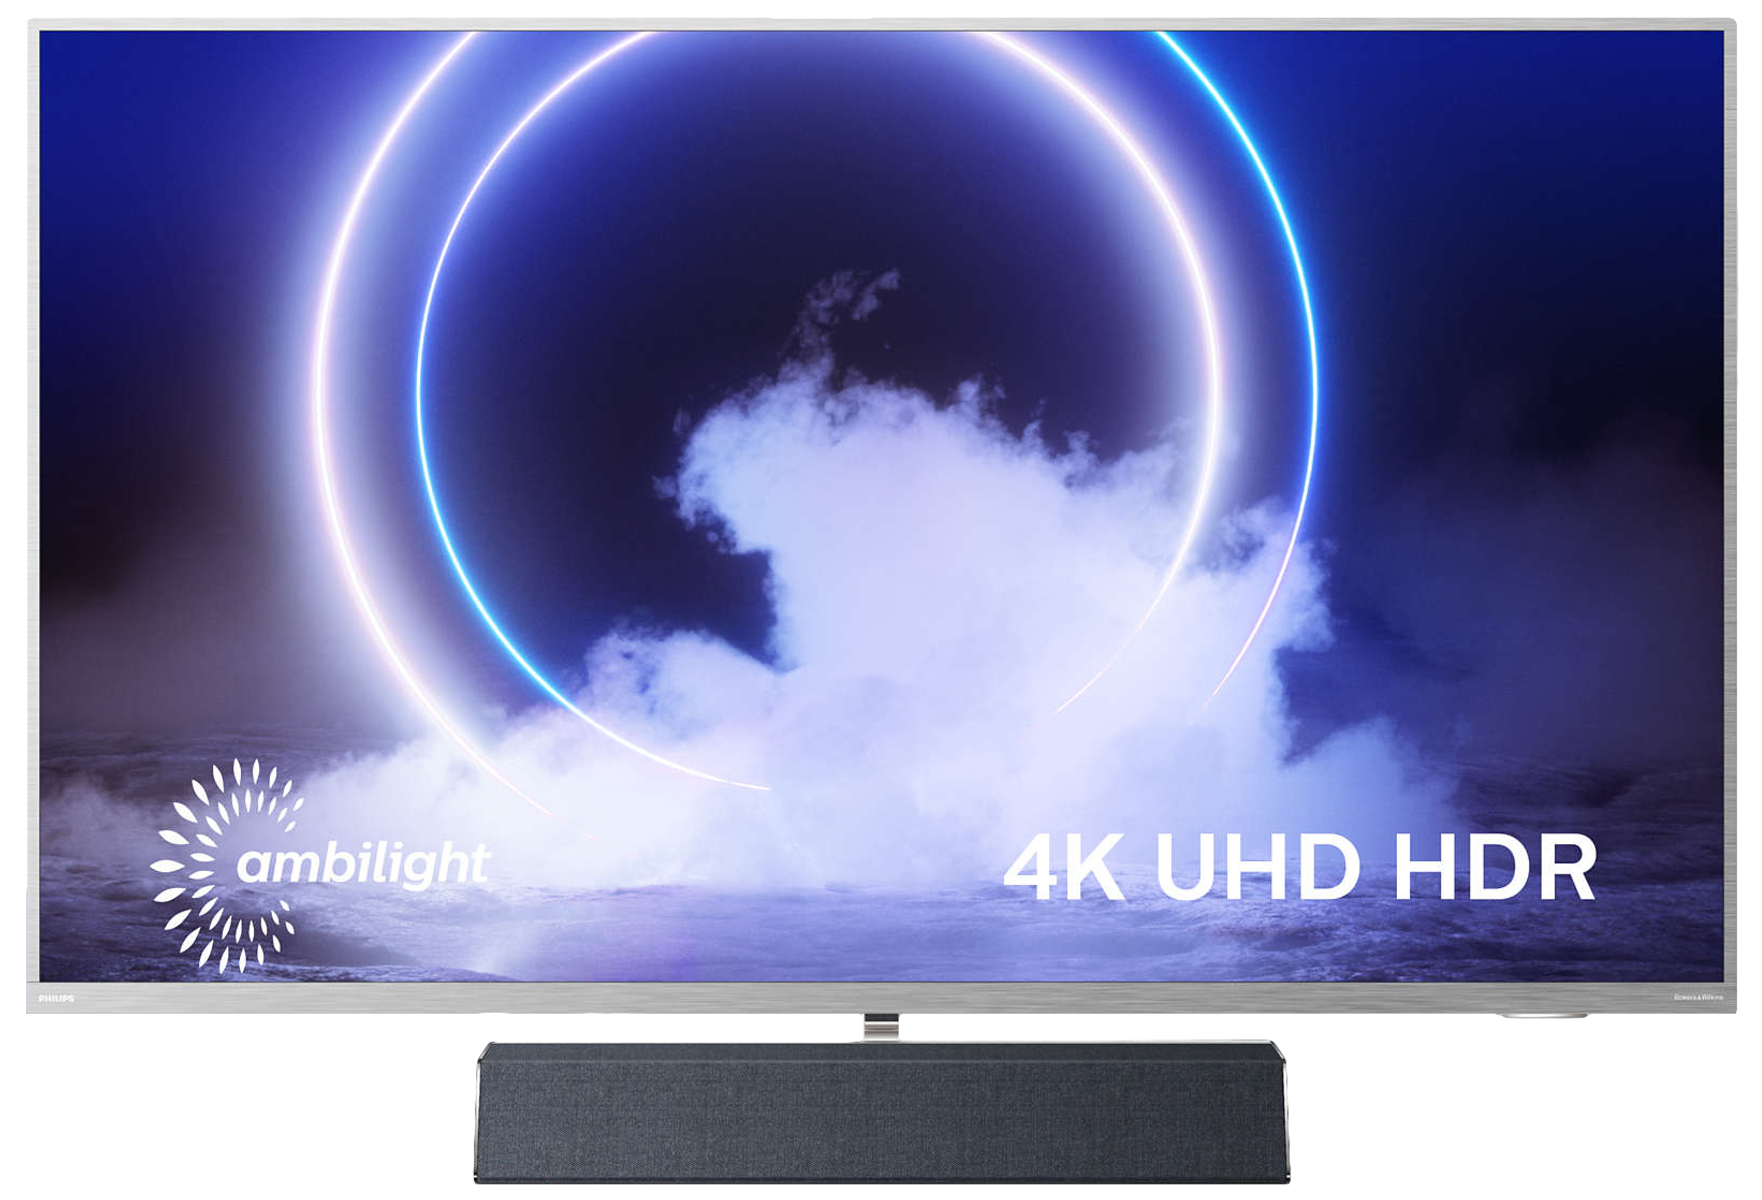 109,22 UHD 109,2 cm, Zoll) TV 9 Android (43 Ambilight, (Flat, 4K, PHILIPS / Zoll 43PUS9235/12 cm LED 43 (Pie)) TV™